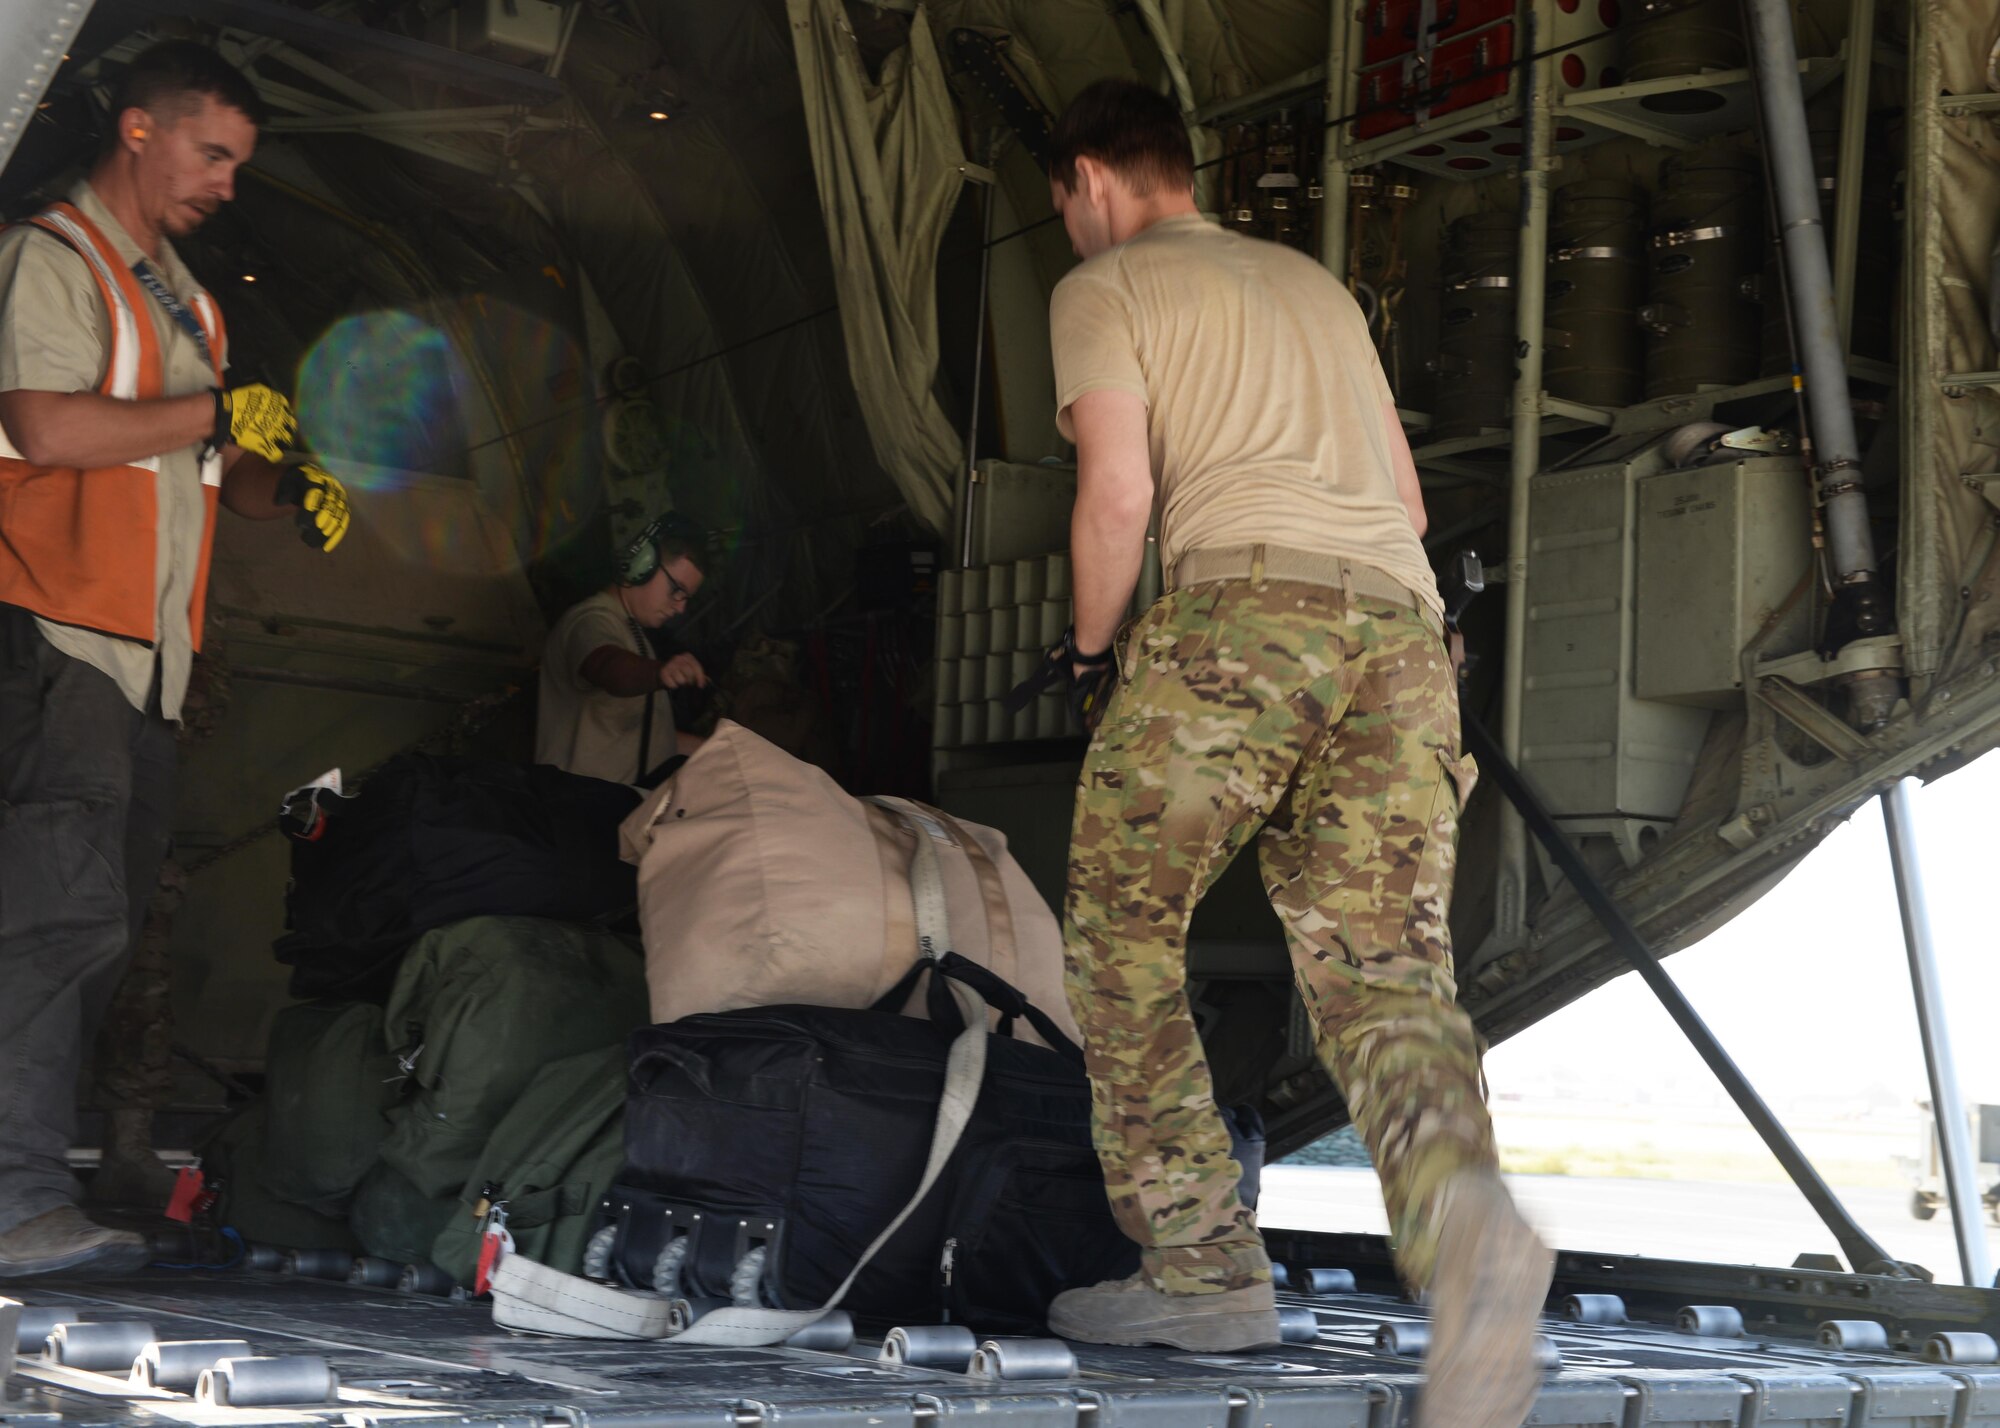 U.S. Air Force Staff Sgt. Casey Strauss, 774th Expeditionary Airlift Squadron C-130J Super Hercules aircraft loadmaster, moves luggage onto an aircraft Aug. 28, 2015, at Bagram Airfield, Afghanistan. Strauss and his fellow loadmasters are responsible for loading and unloading cargo, passenger safety in flight, and ensuring the aircraft stays within the proper weight and balance limitations. (U.S. Air Force photo by Senior Airman Cierra Presentado/Released)